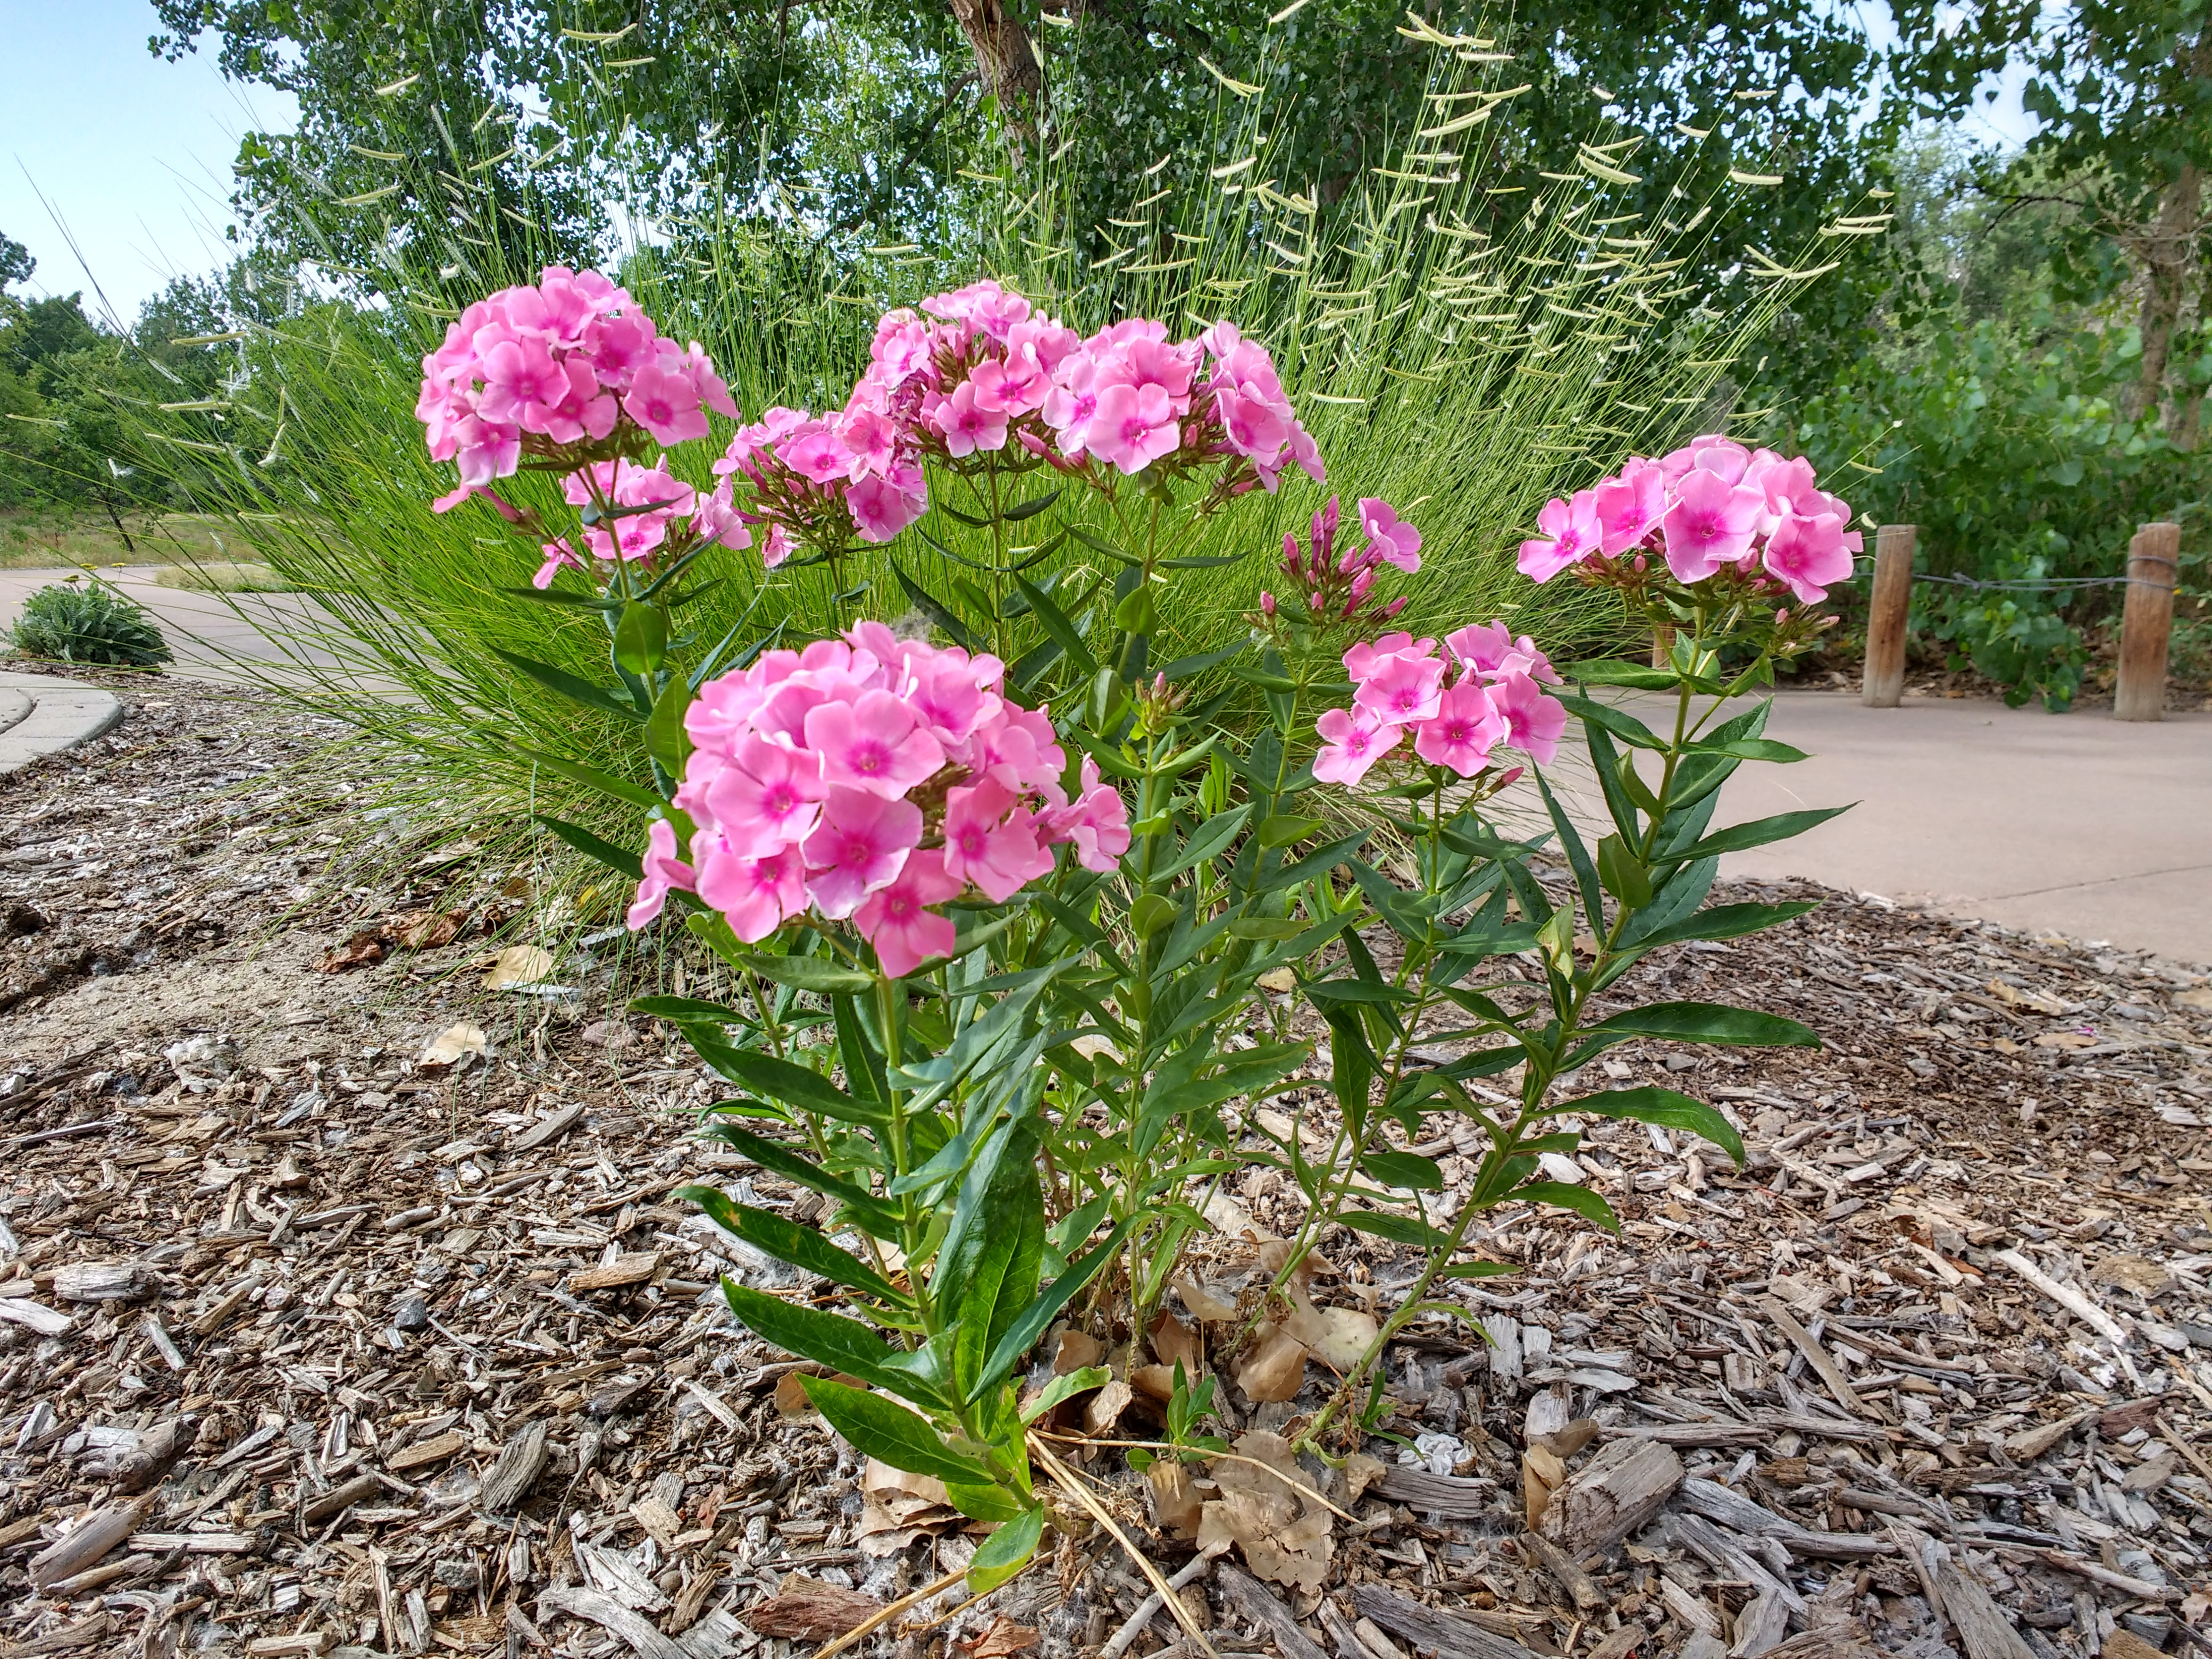 Tall Phlox Plant with Clusters of Pink Flowers Picture | Free